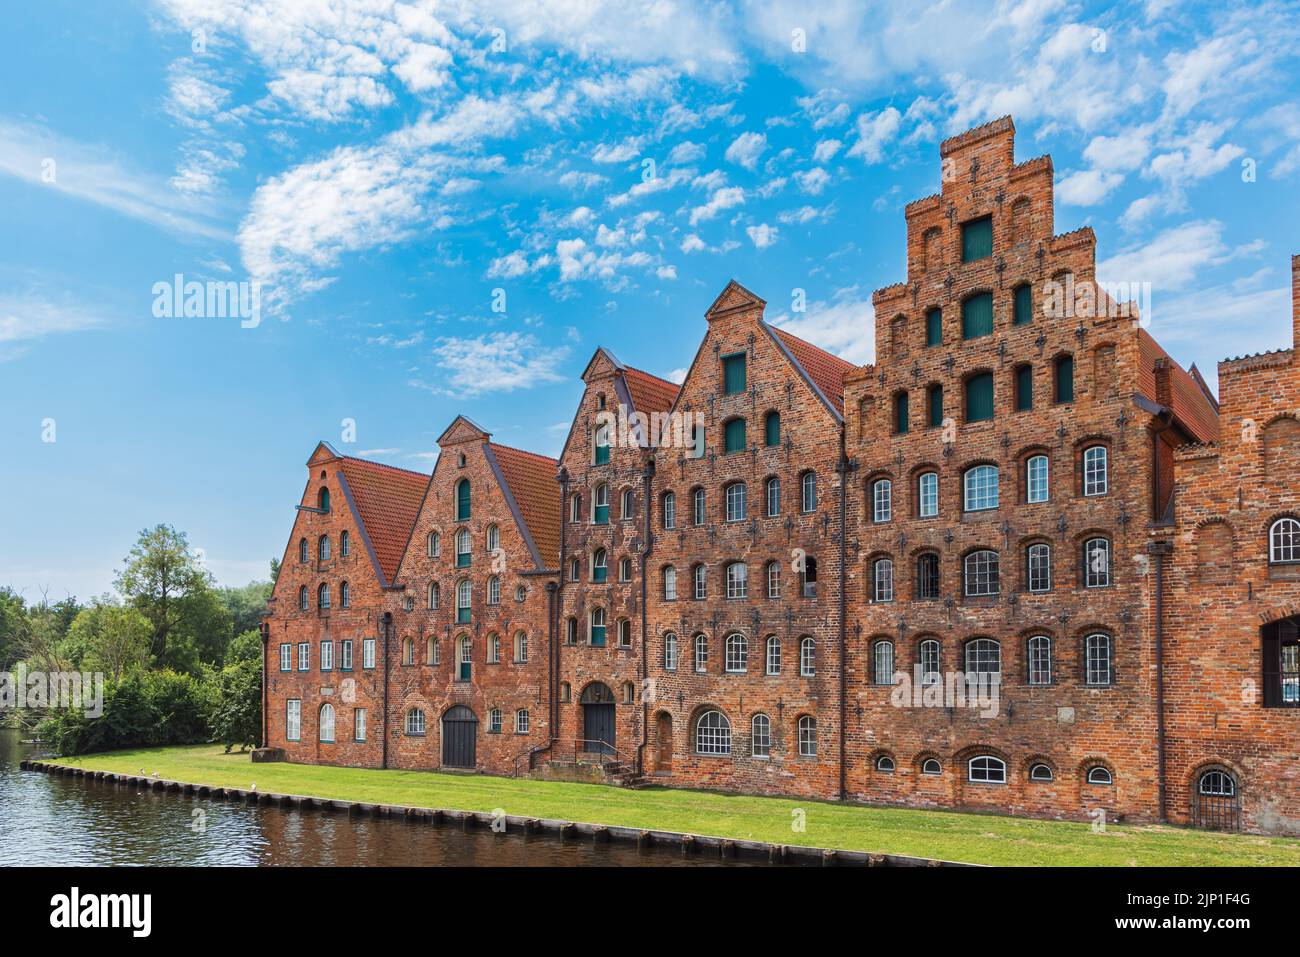 Cityscape with ancient building row of buildings called Salzspeicher in Lubeck in schleswig-holstein in northern Germany Stock Photo